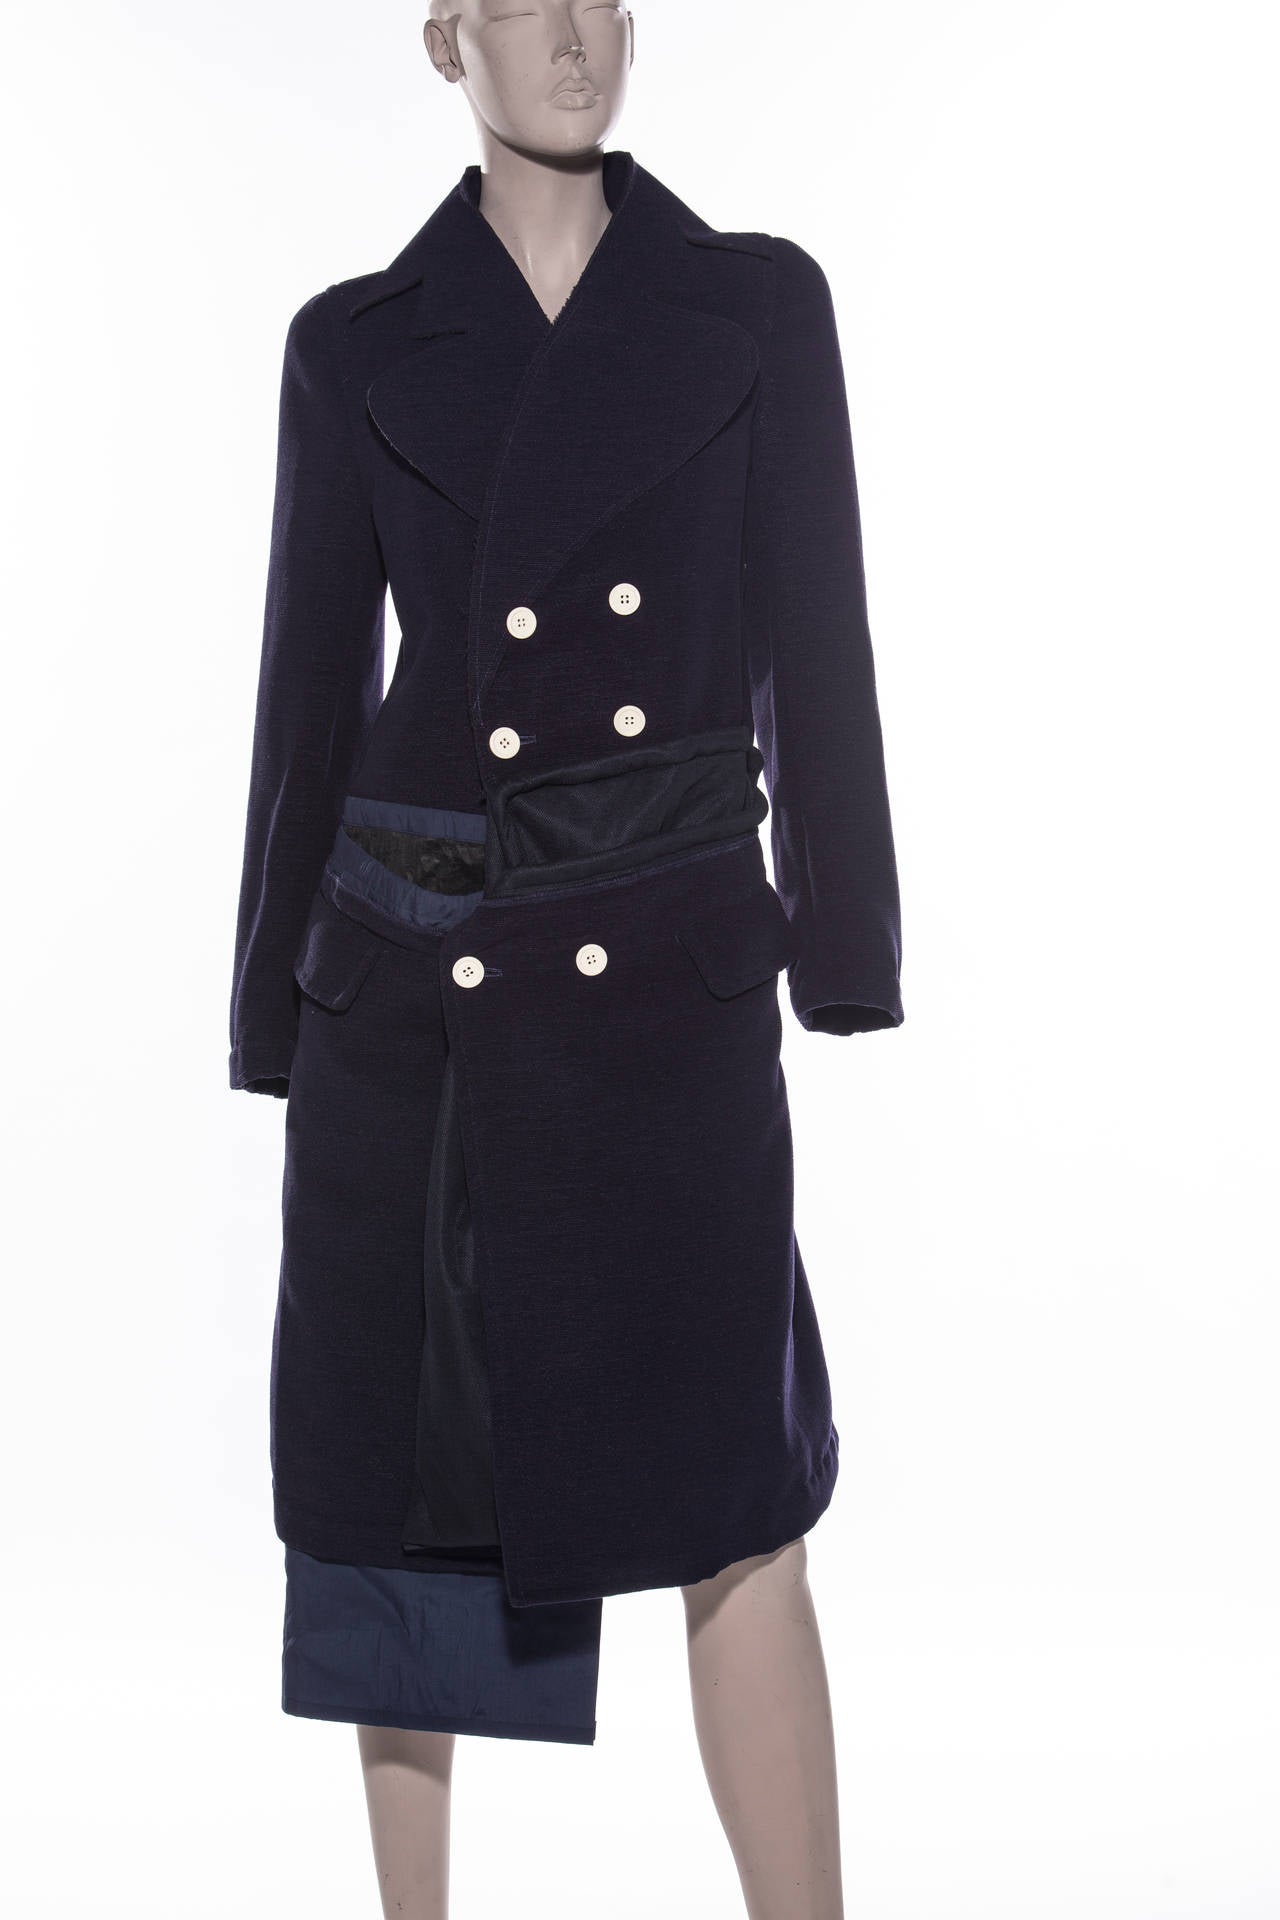 Comme des Garcons, 2007, button front coat with oversize drawstring pockets.